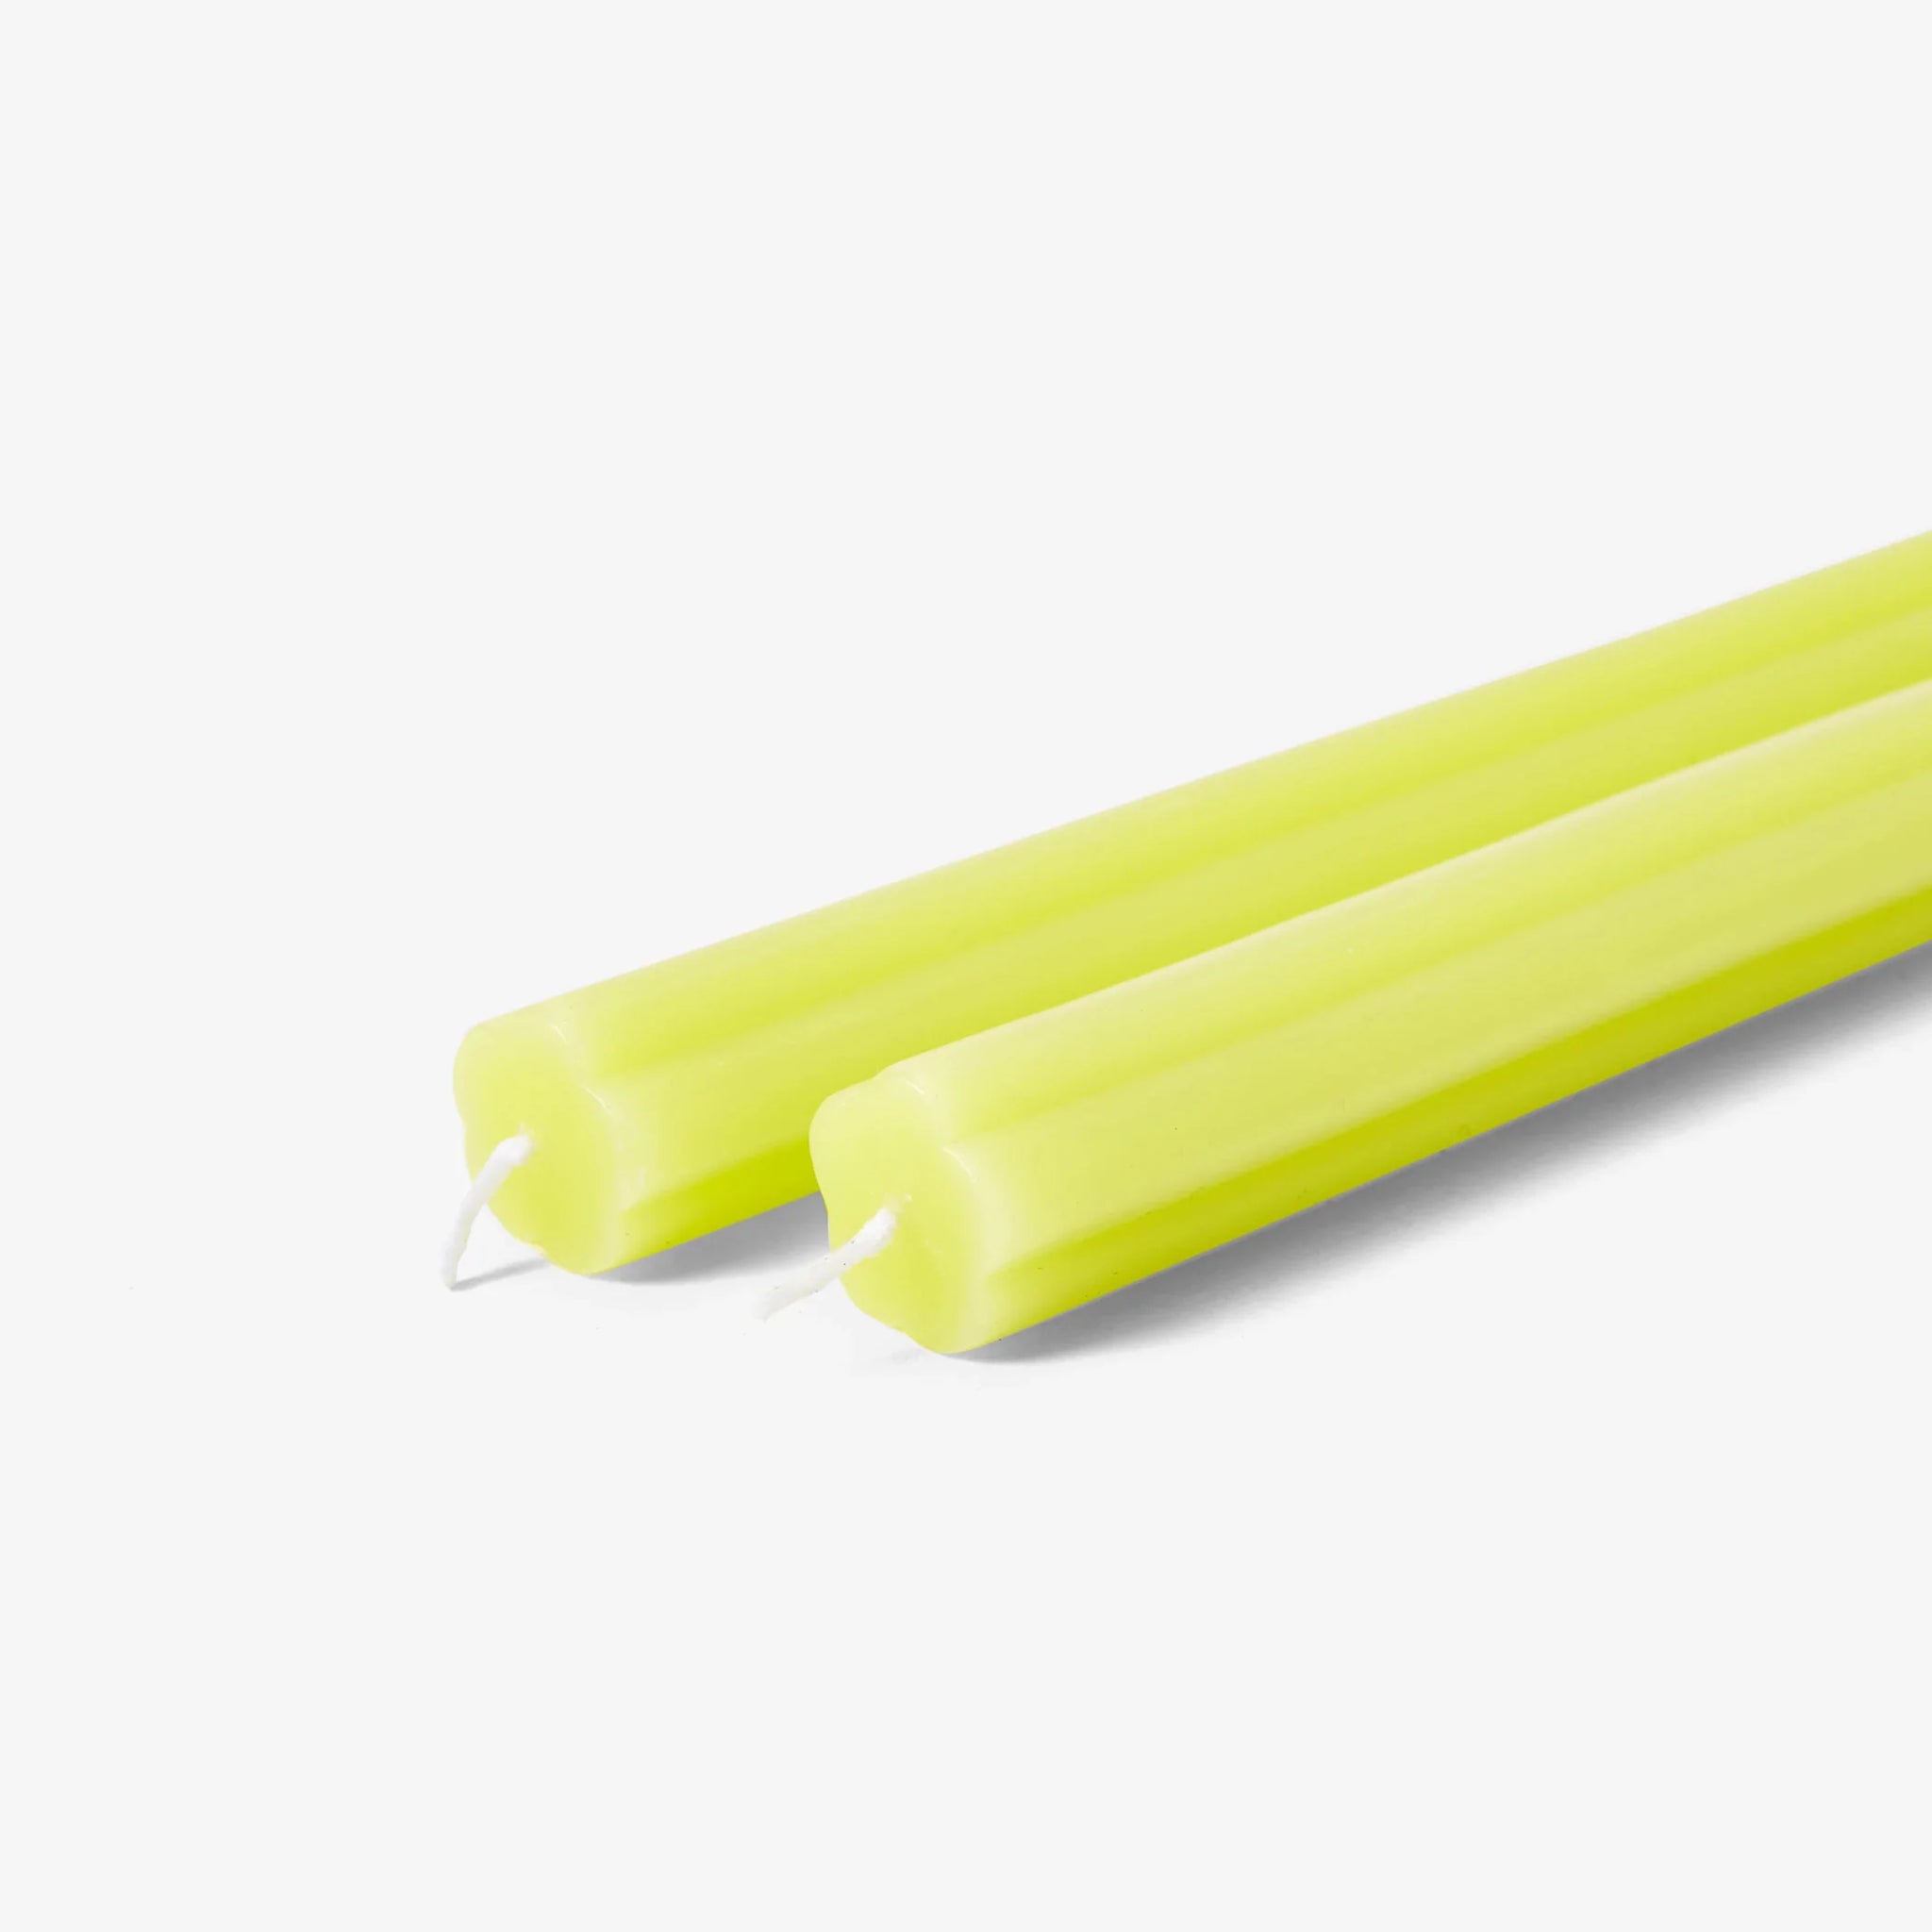 Dusen Dusen Taper Candles in Yellow | Set of 2